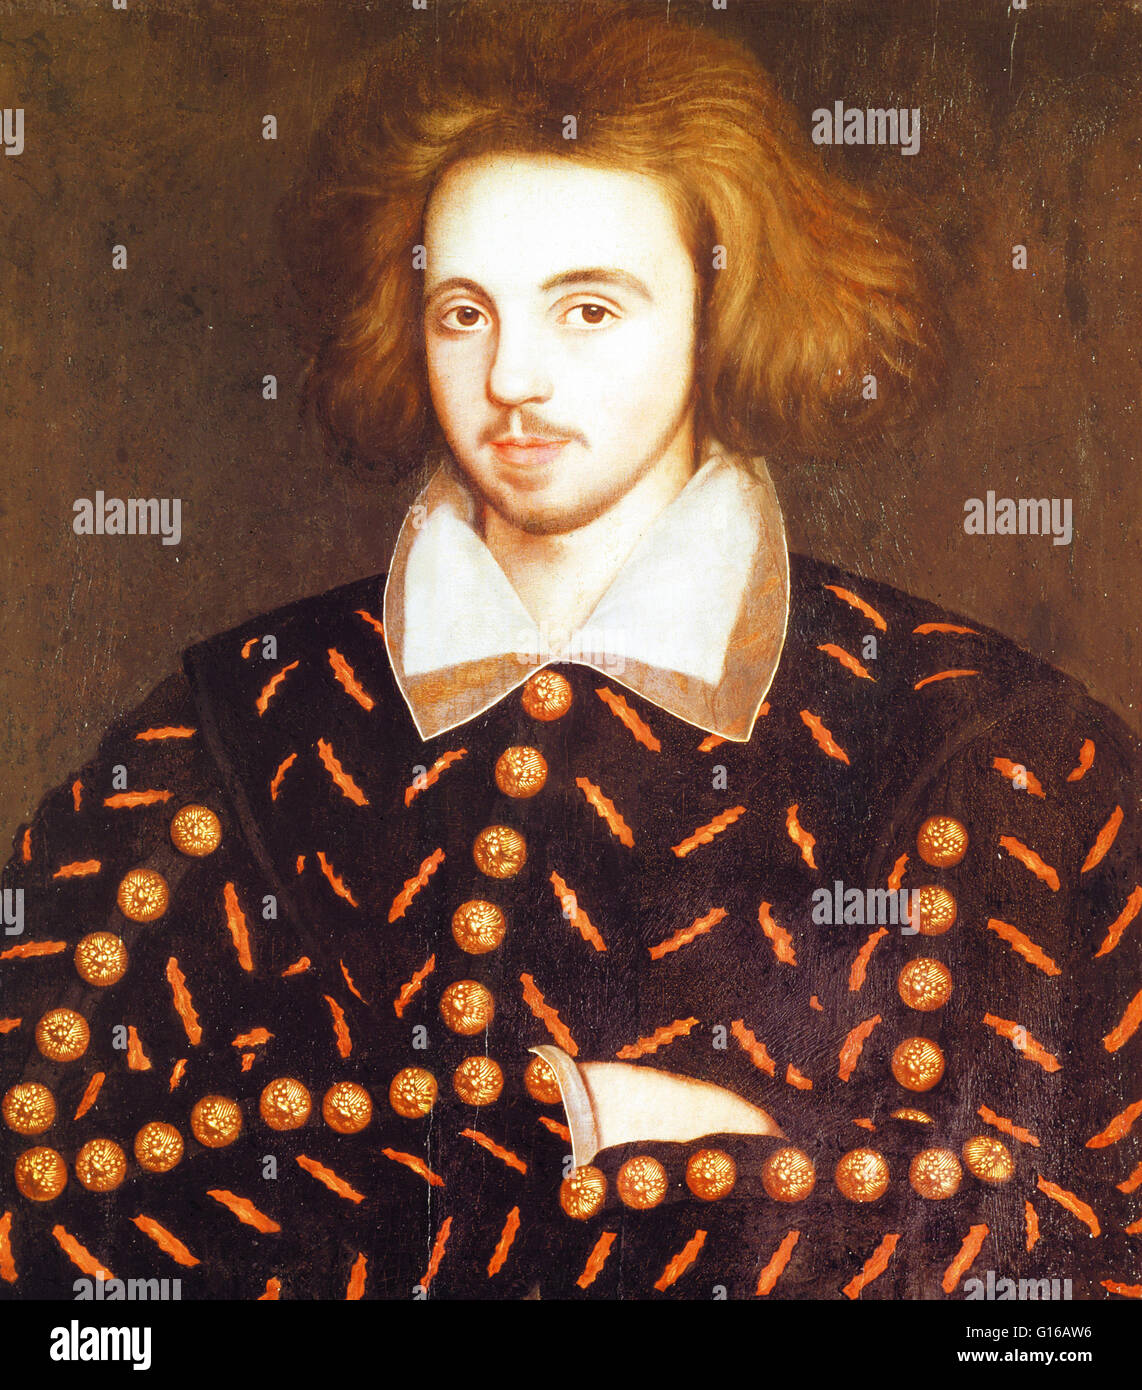 Anonymous portrait believed to be the playwright Marlowe. Christopher Marlowe (February 26, 1564 - May 30, 1593) was an English dramatist, poet and translator of the Elizabethan era. He was the foremost Elizabethan tragedian of his day. He greatly influen Stock Photo